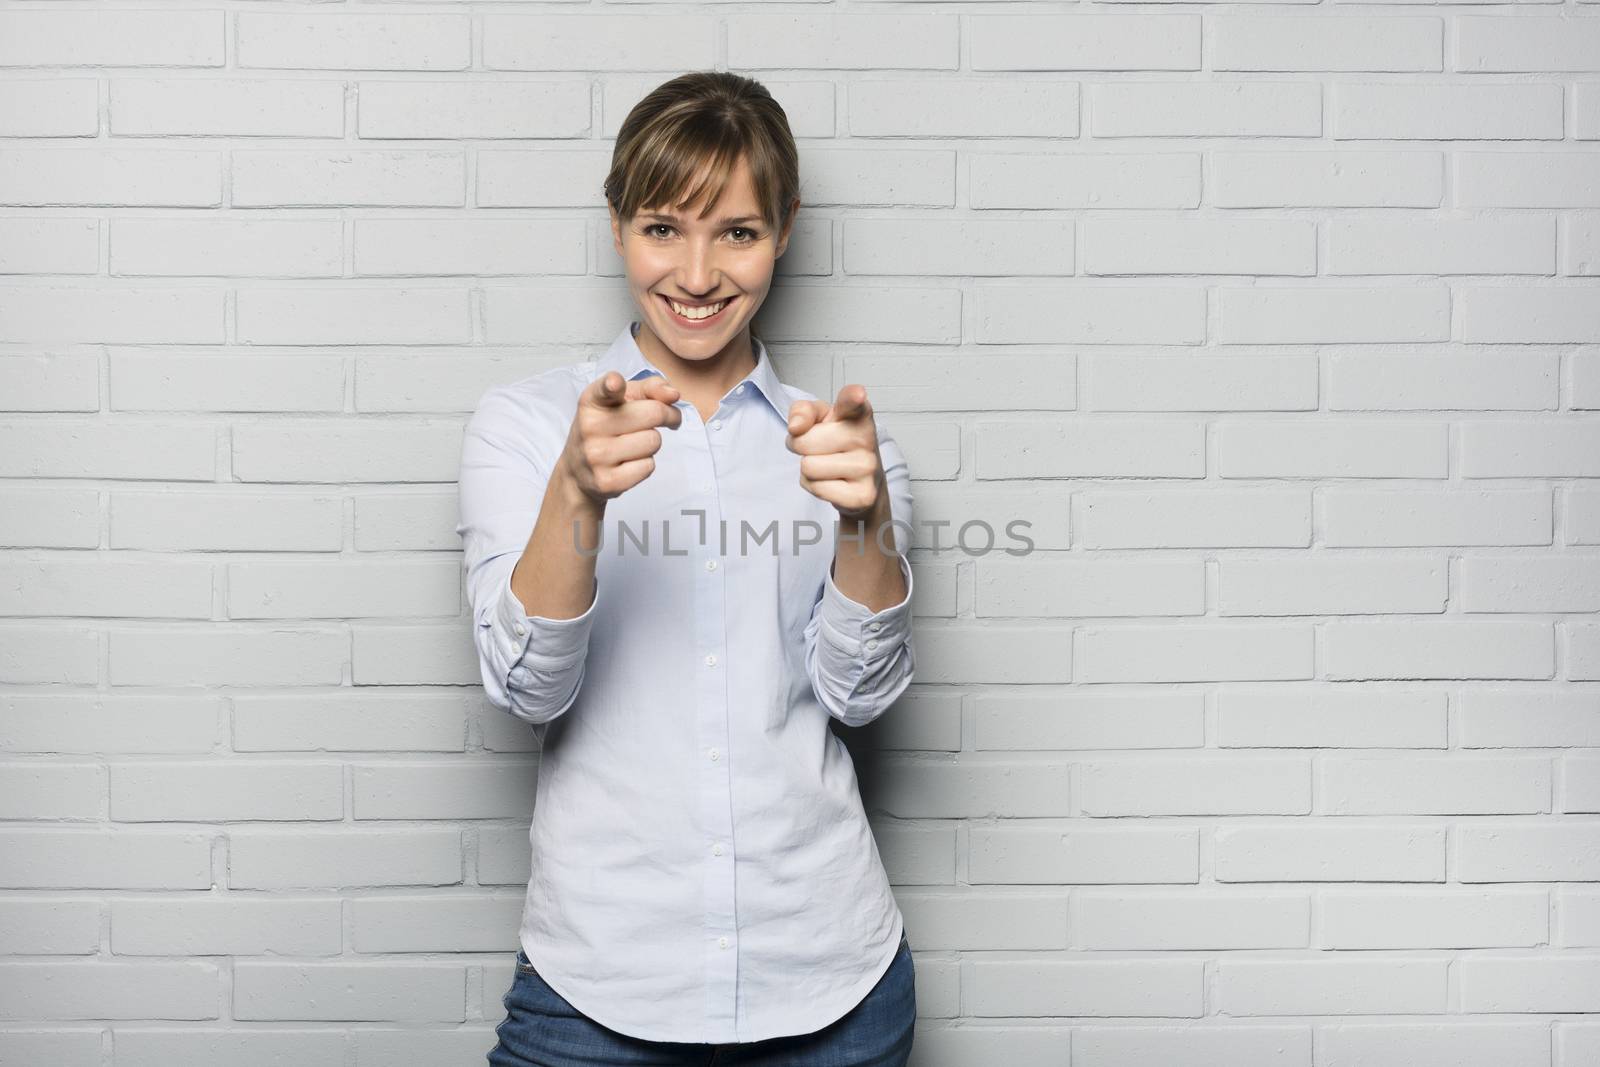 Smiling Cute woman pointing a fingers isolated in front of wall by LDProd